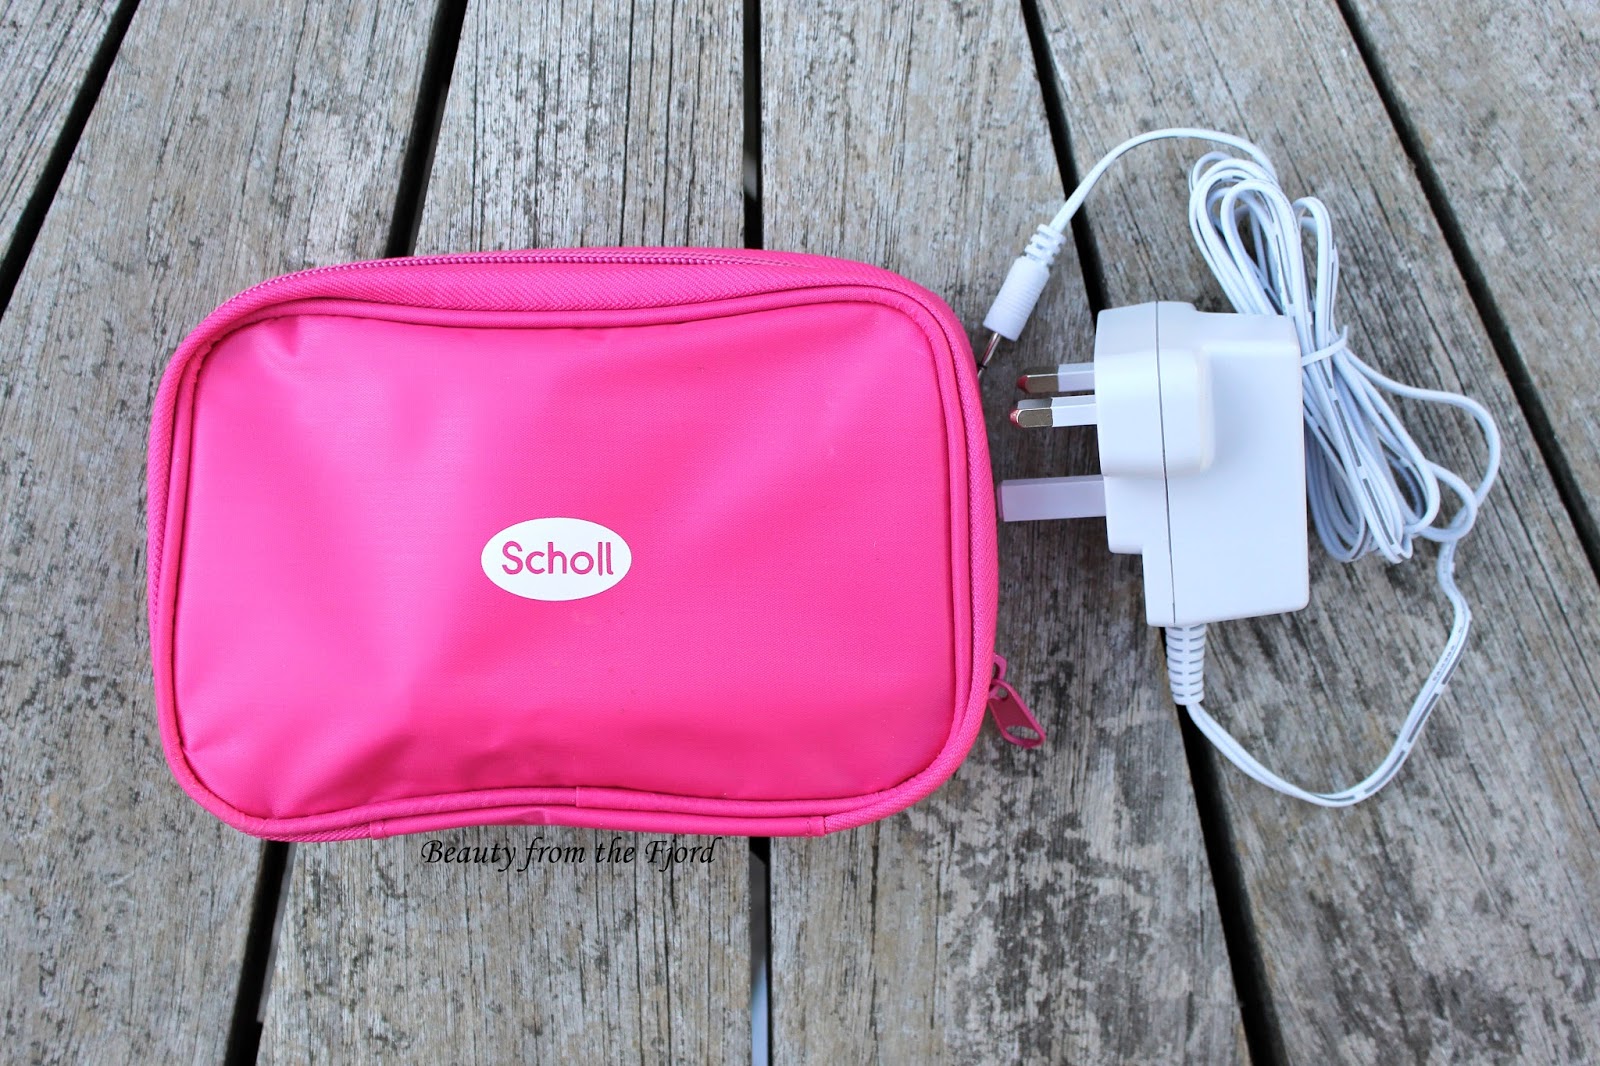 Scholl Cordless Travel Manicure Review -